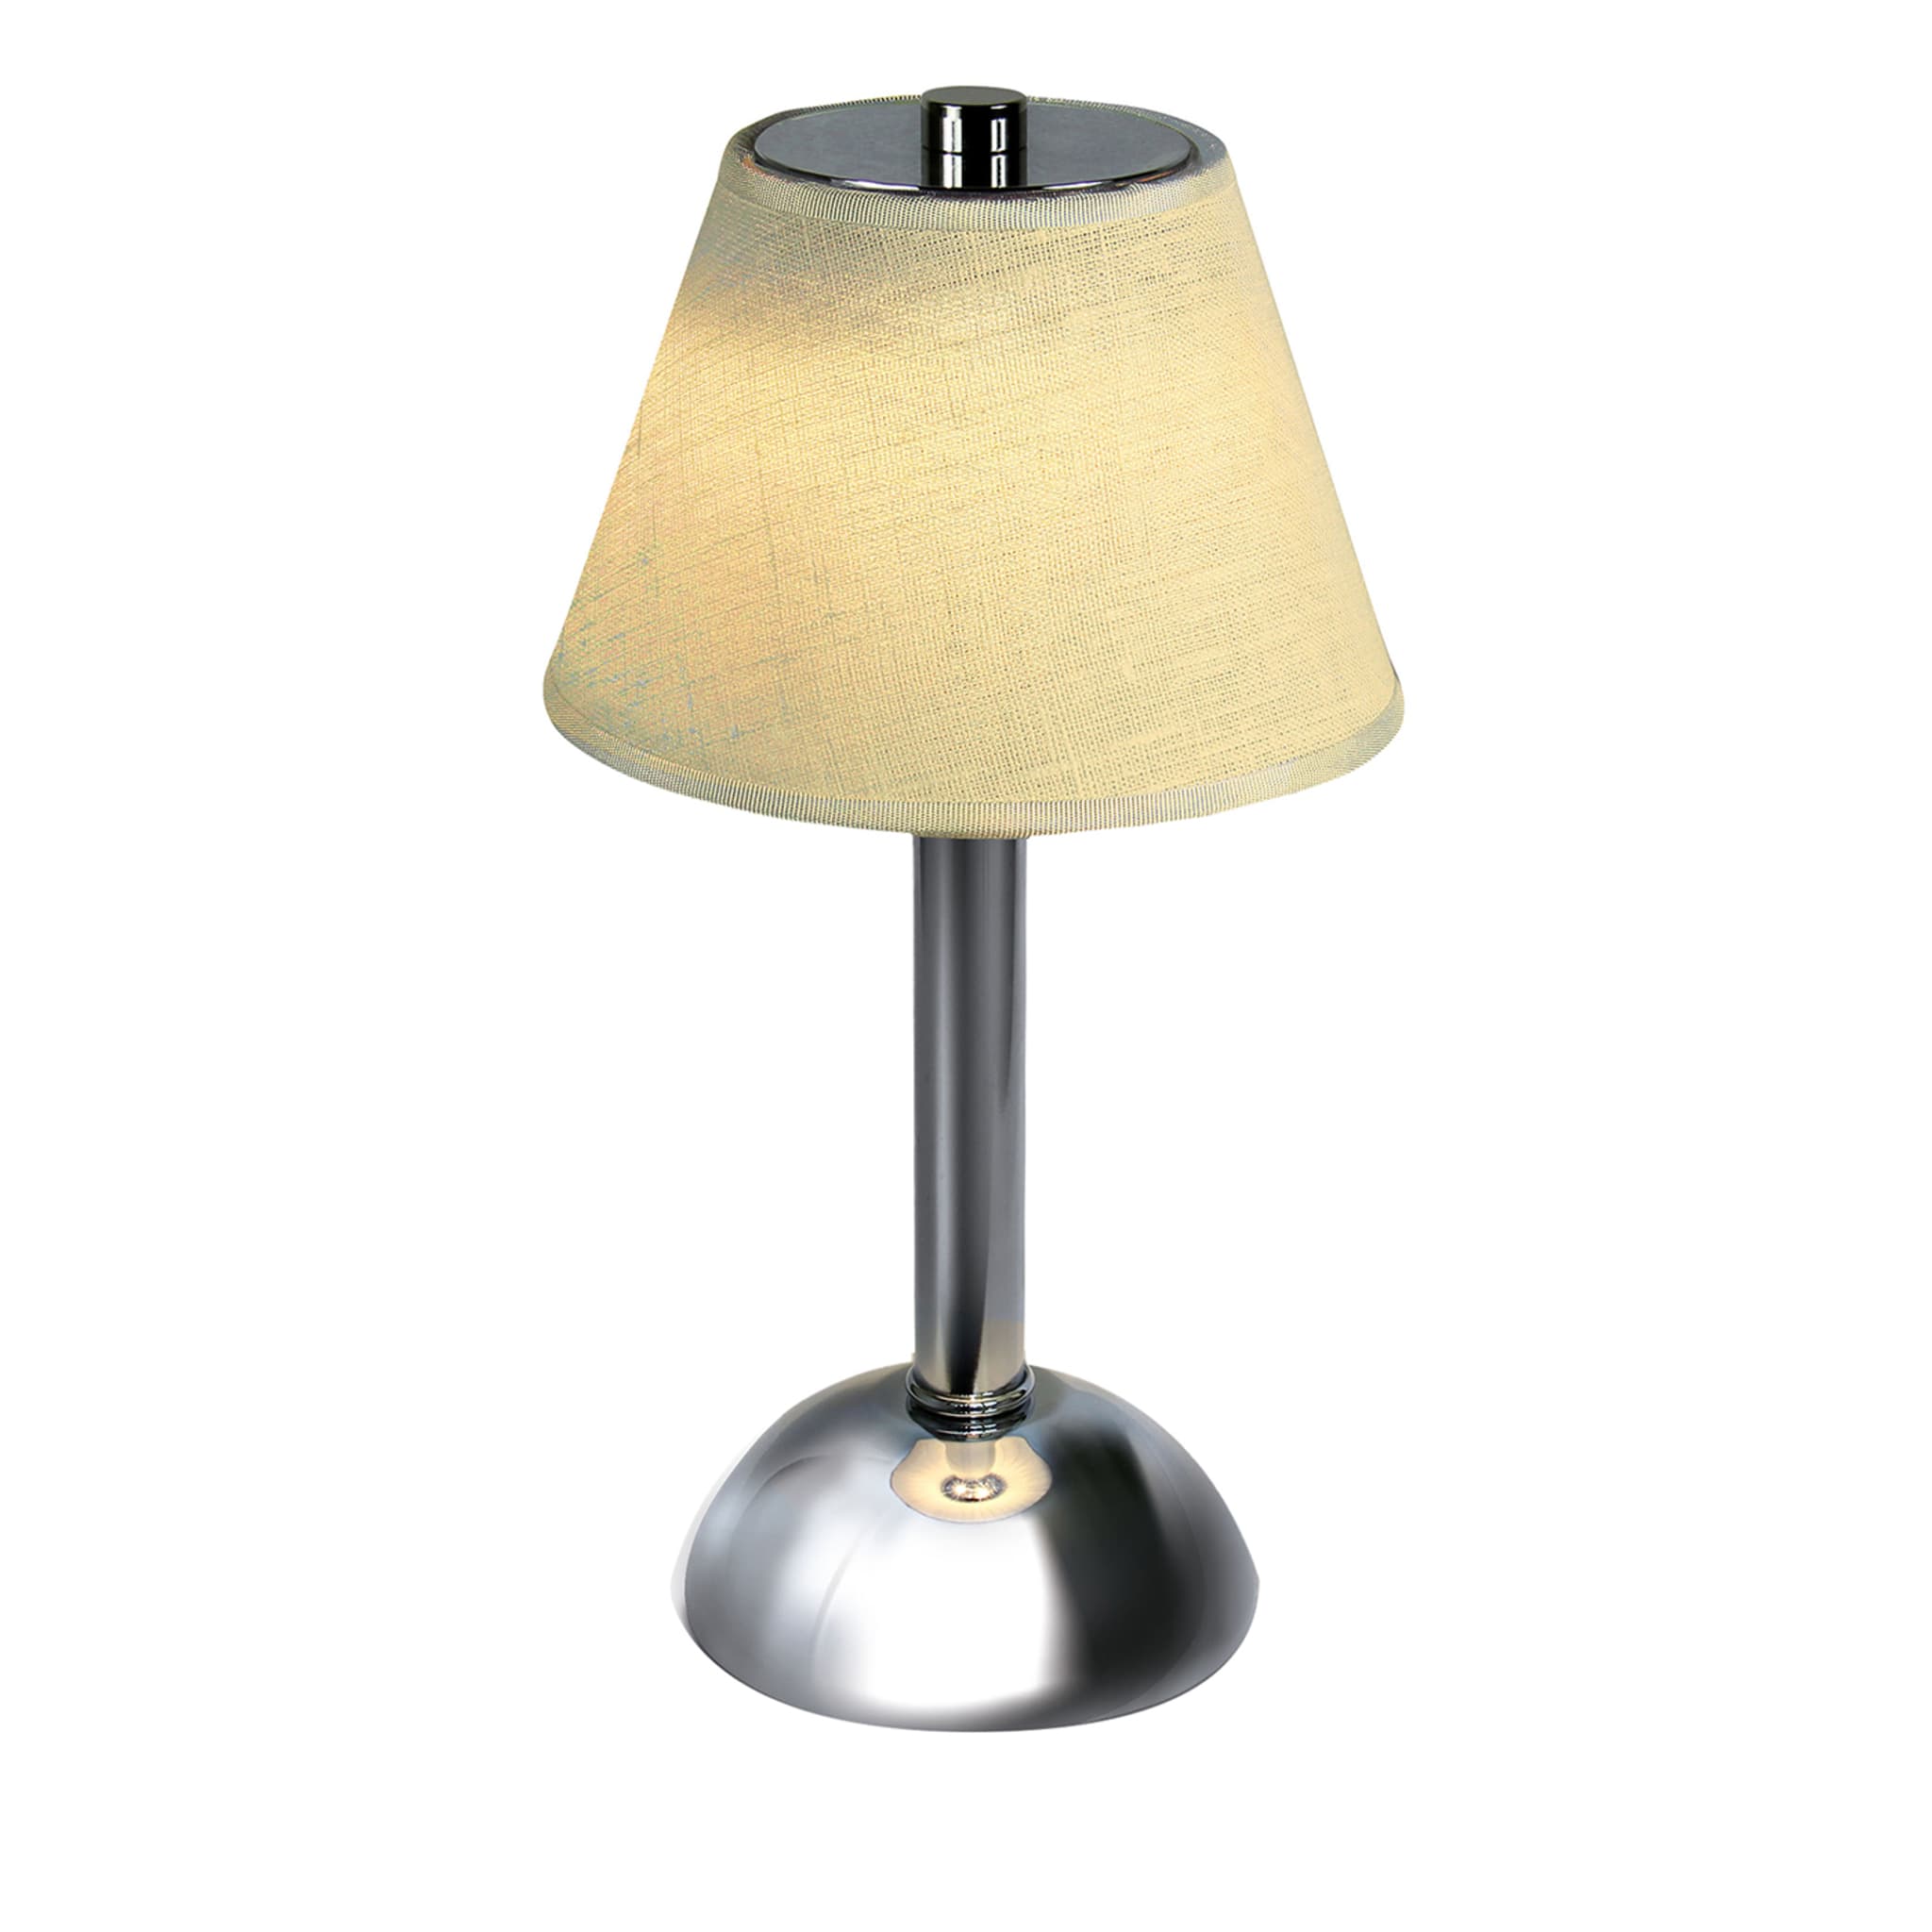 Moon Ivory Linen Chrome Table Lamp by Stefano Tabarin - Main view